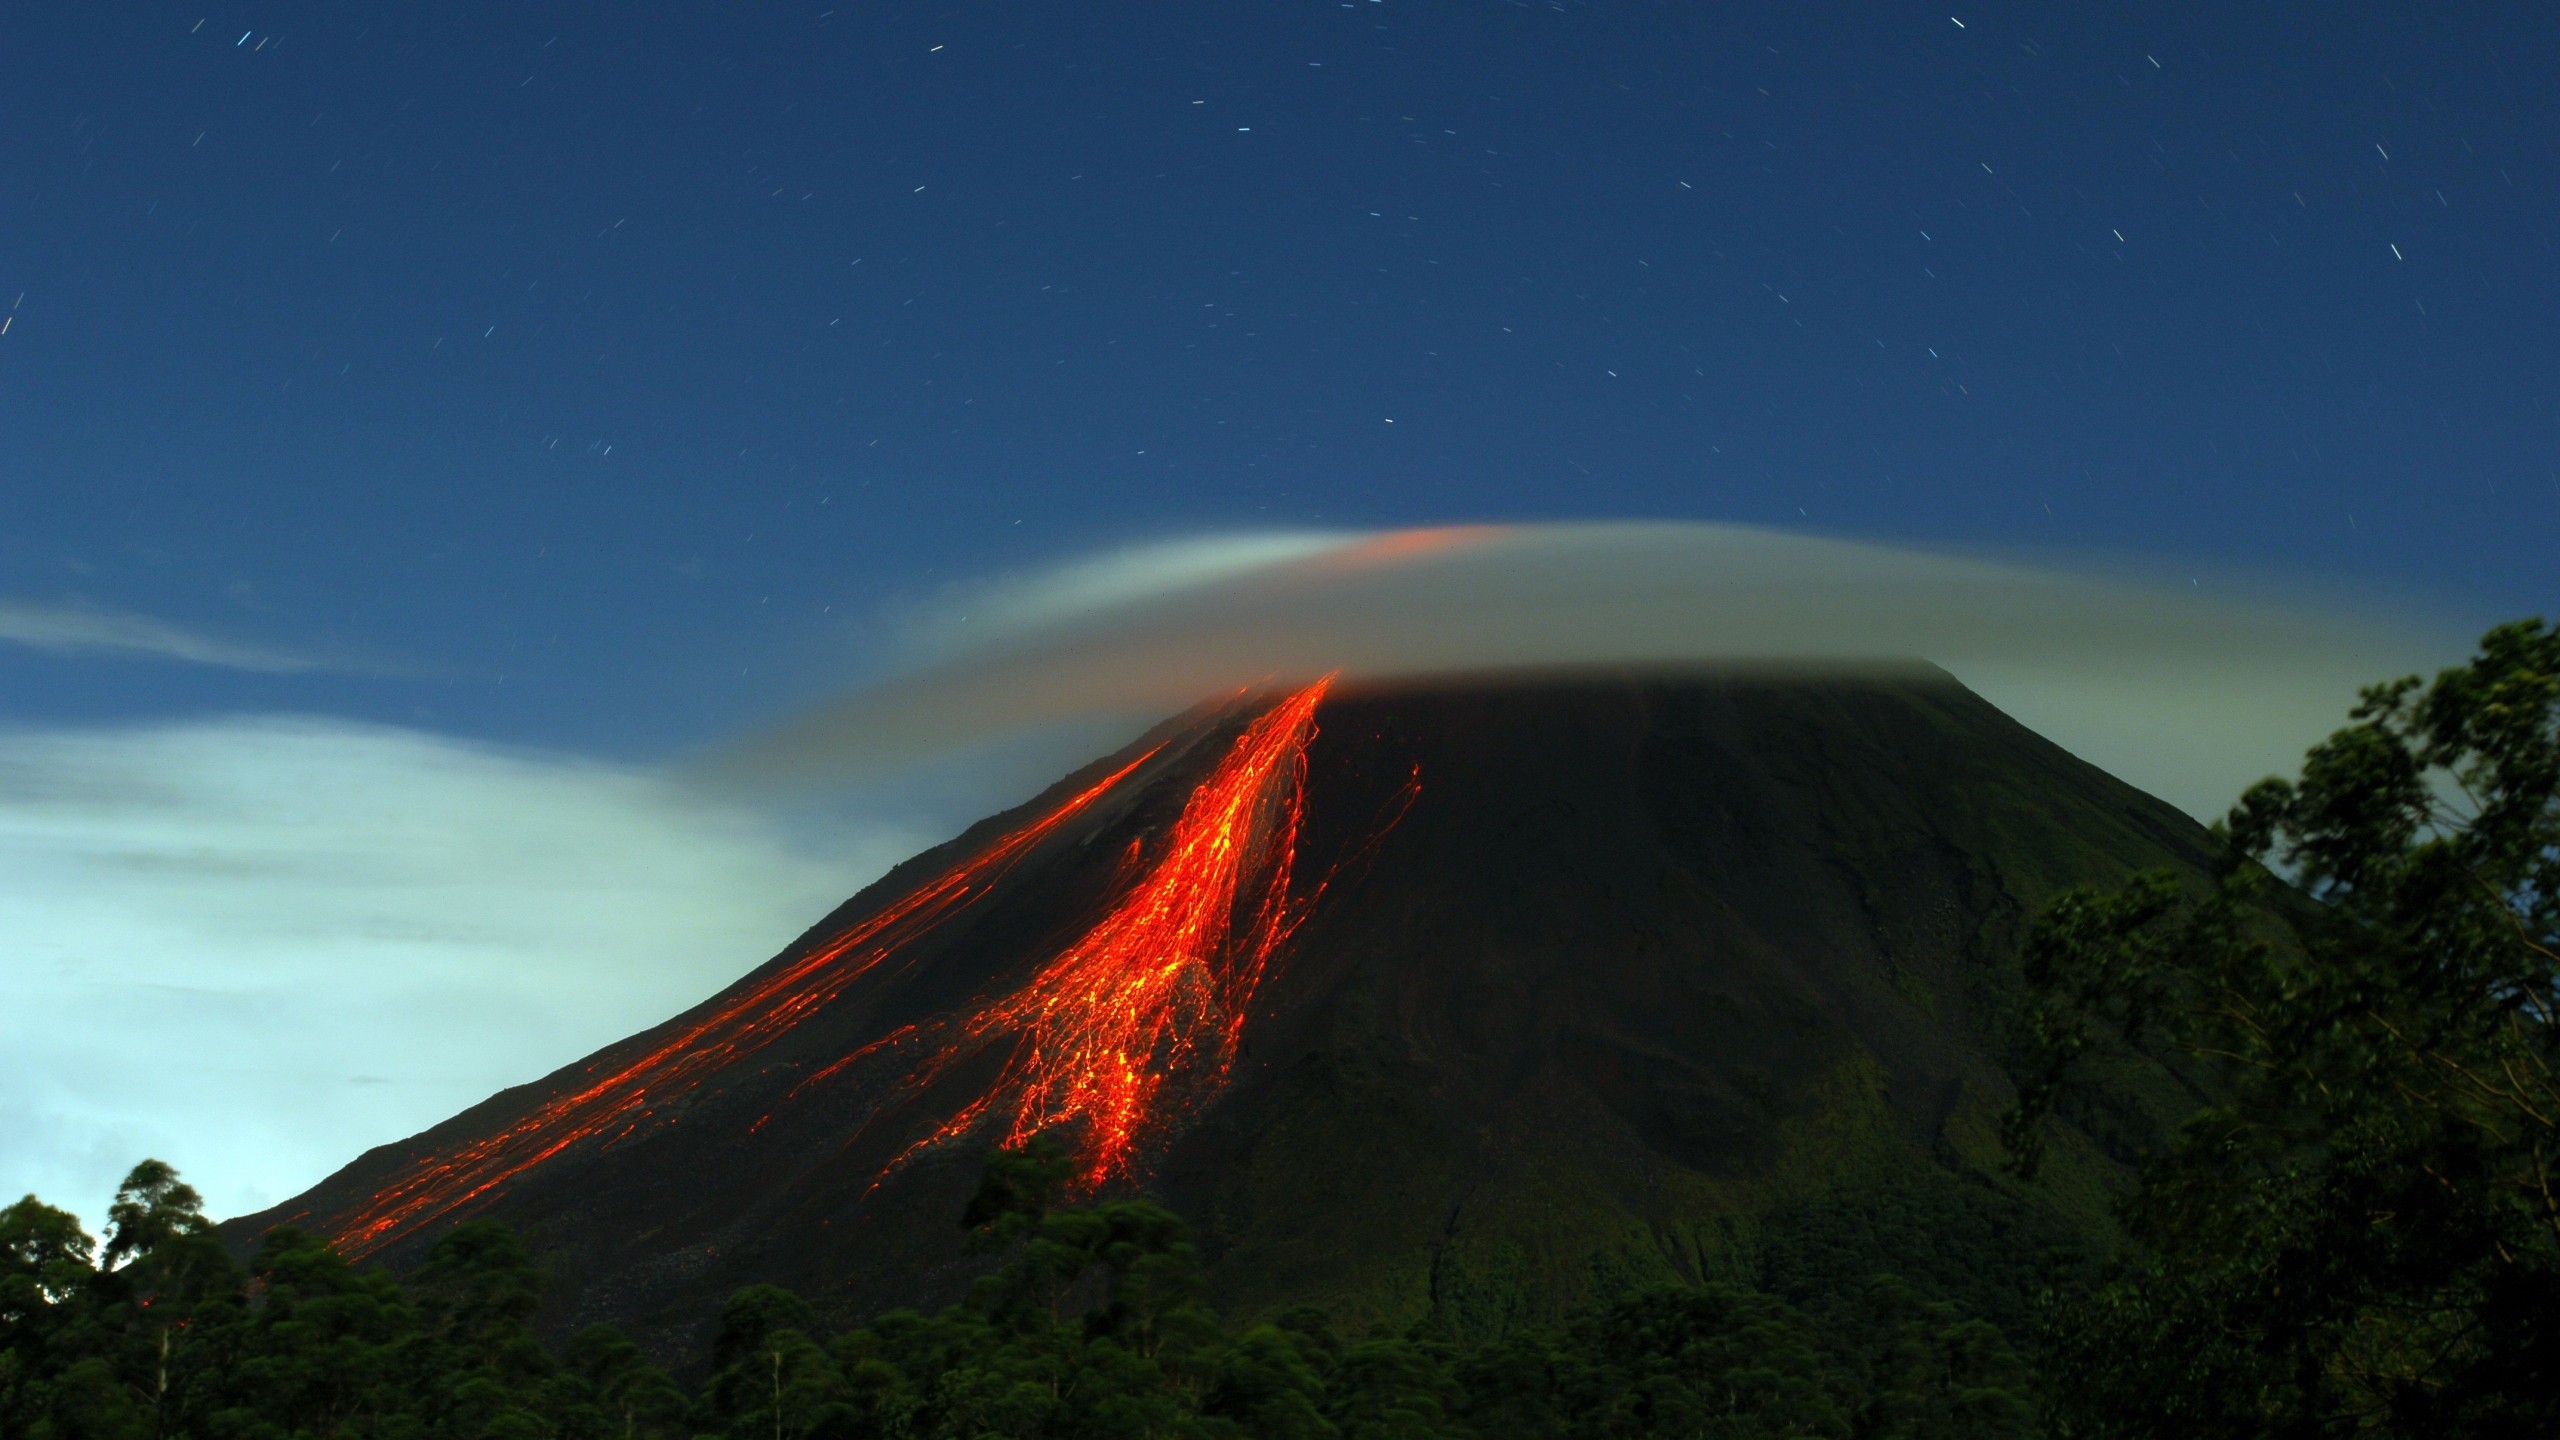 Nature Landscape Sky Clouds Volcano Eruption Lava Trees Forest Night Stars Long Exposure 2560x1440